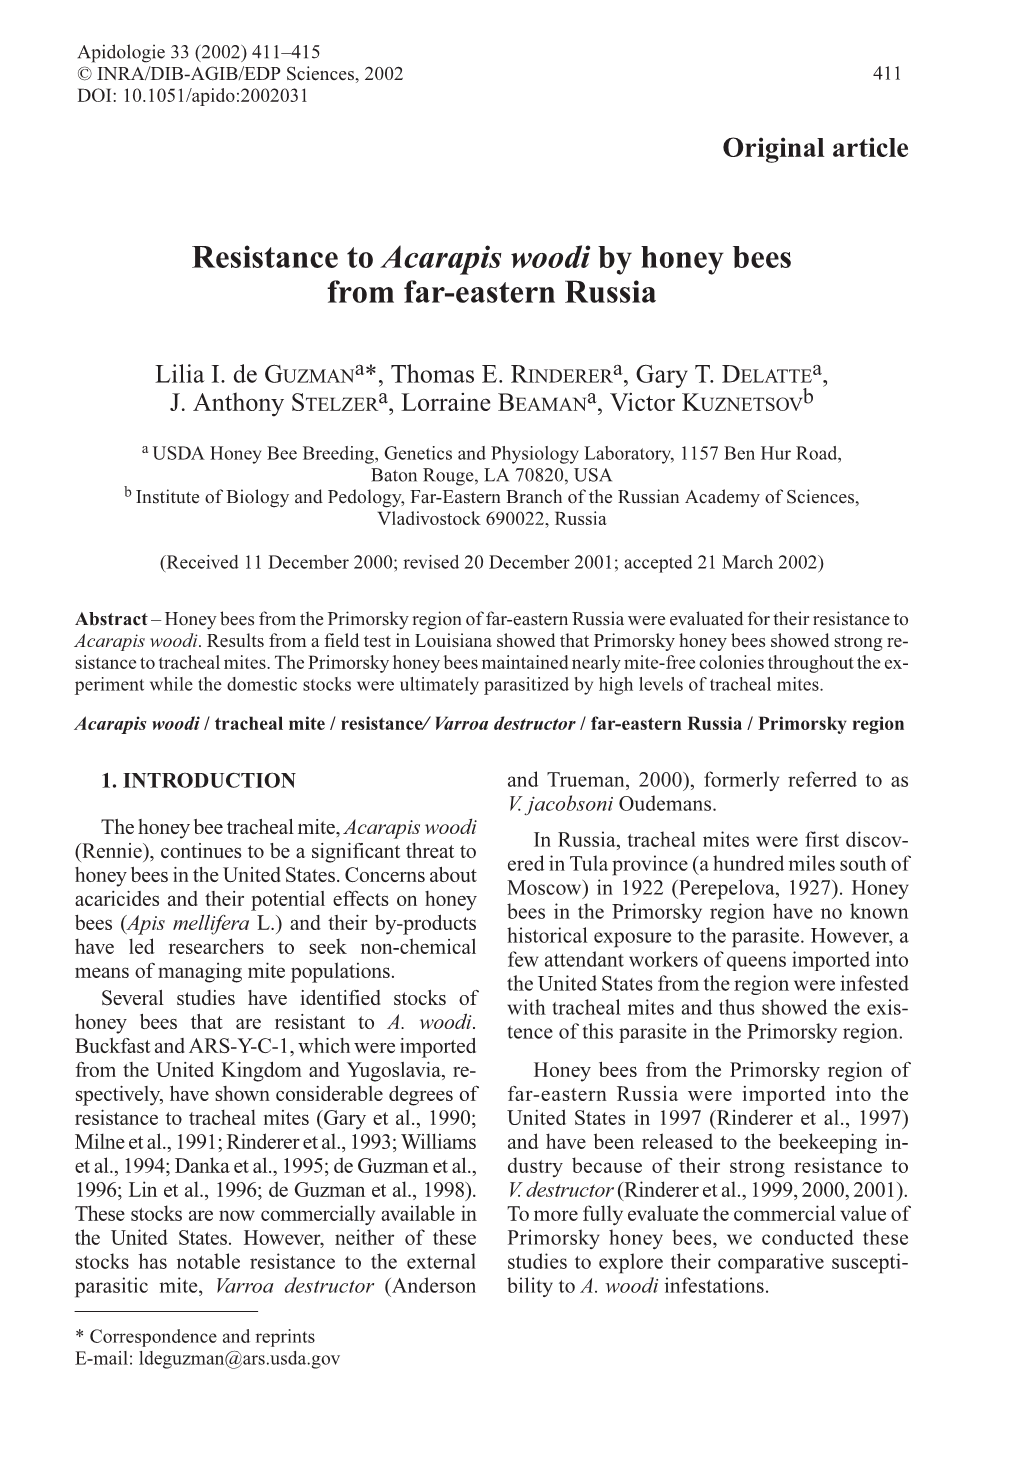 Resistance to Acarapis Woodi by Honey Bees from Far-Eastern Russia